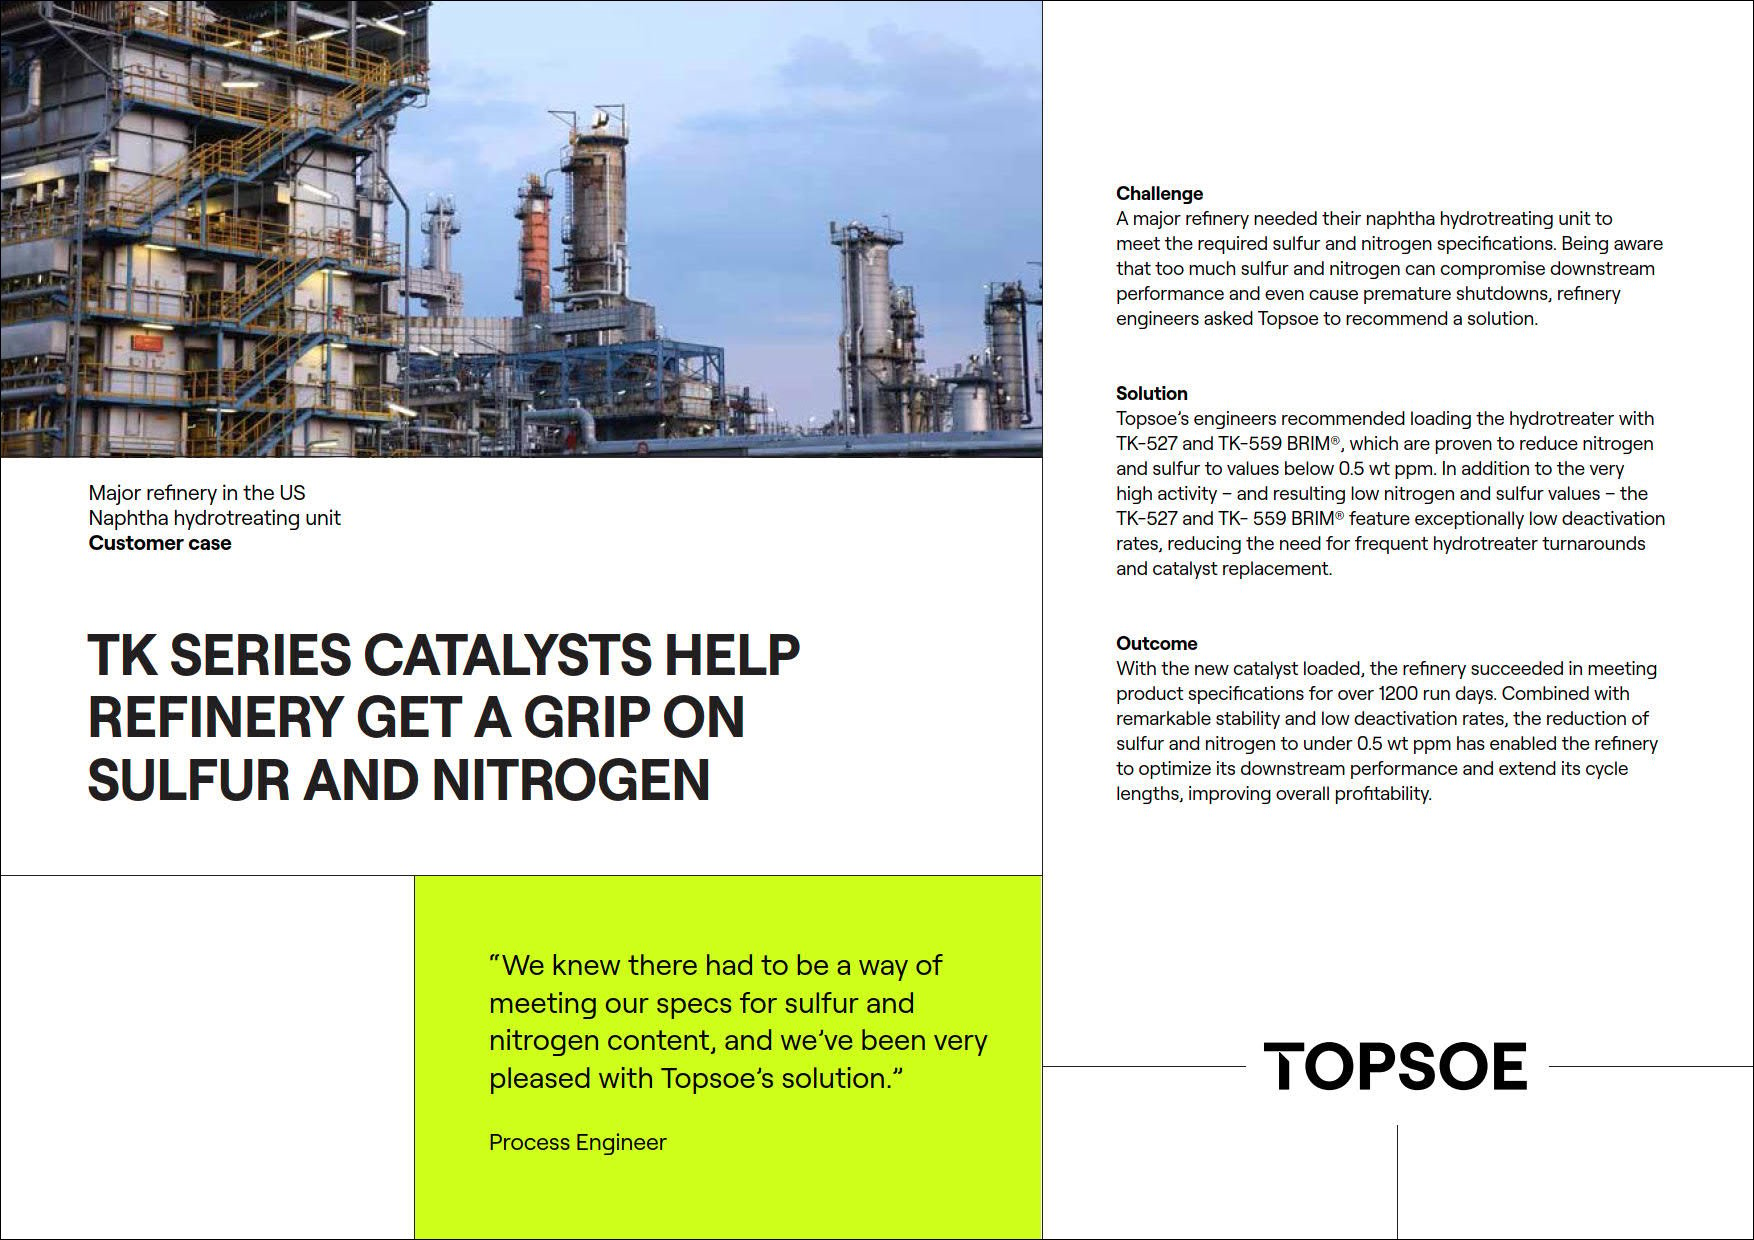 TK series catalysts help refinery get a grip on sulfur and nitrogen